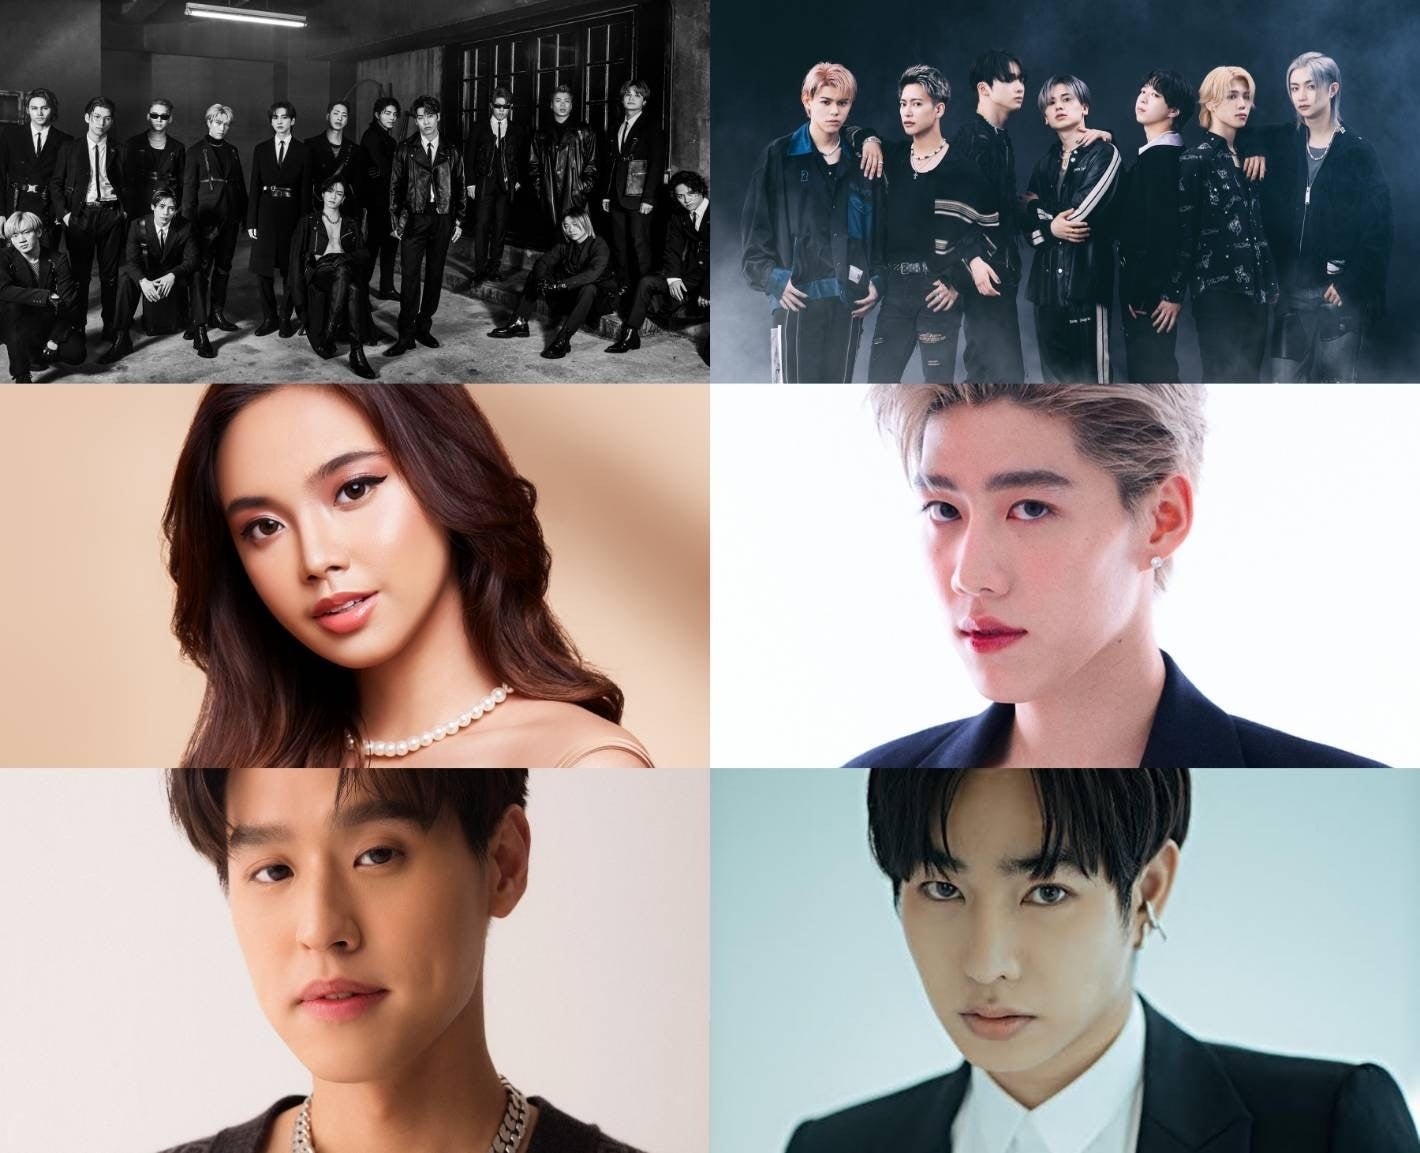 「2022 Asia Artist Awards in Japan」出演アーティスト発表【第７弾】THE RAMPAGE from EXILE TRIBE 、BE:FIRST 出演決定！のサブ画像1